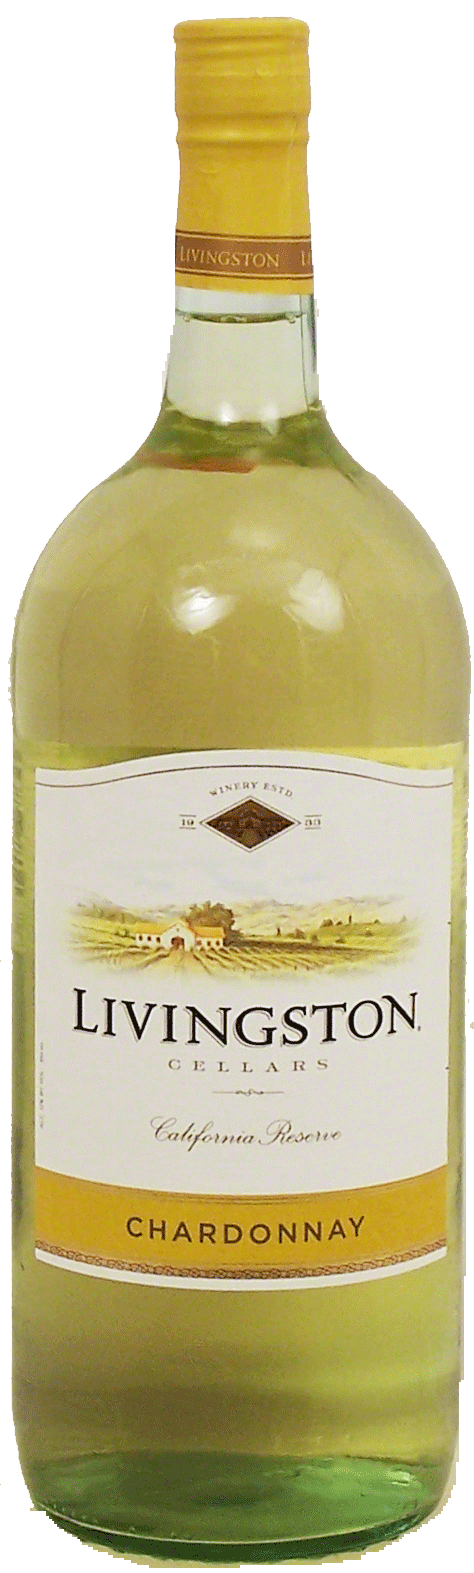 Livingston Cellars California Reserve chardonnay wine, 12% alc. by vol. Full-Size Picture